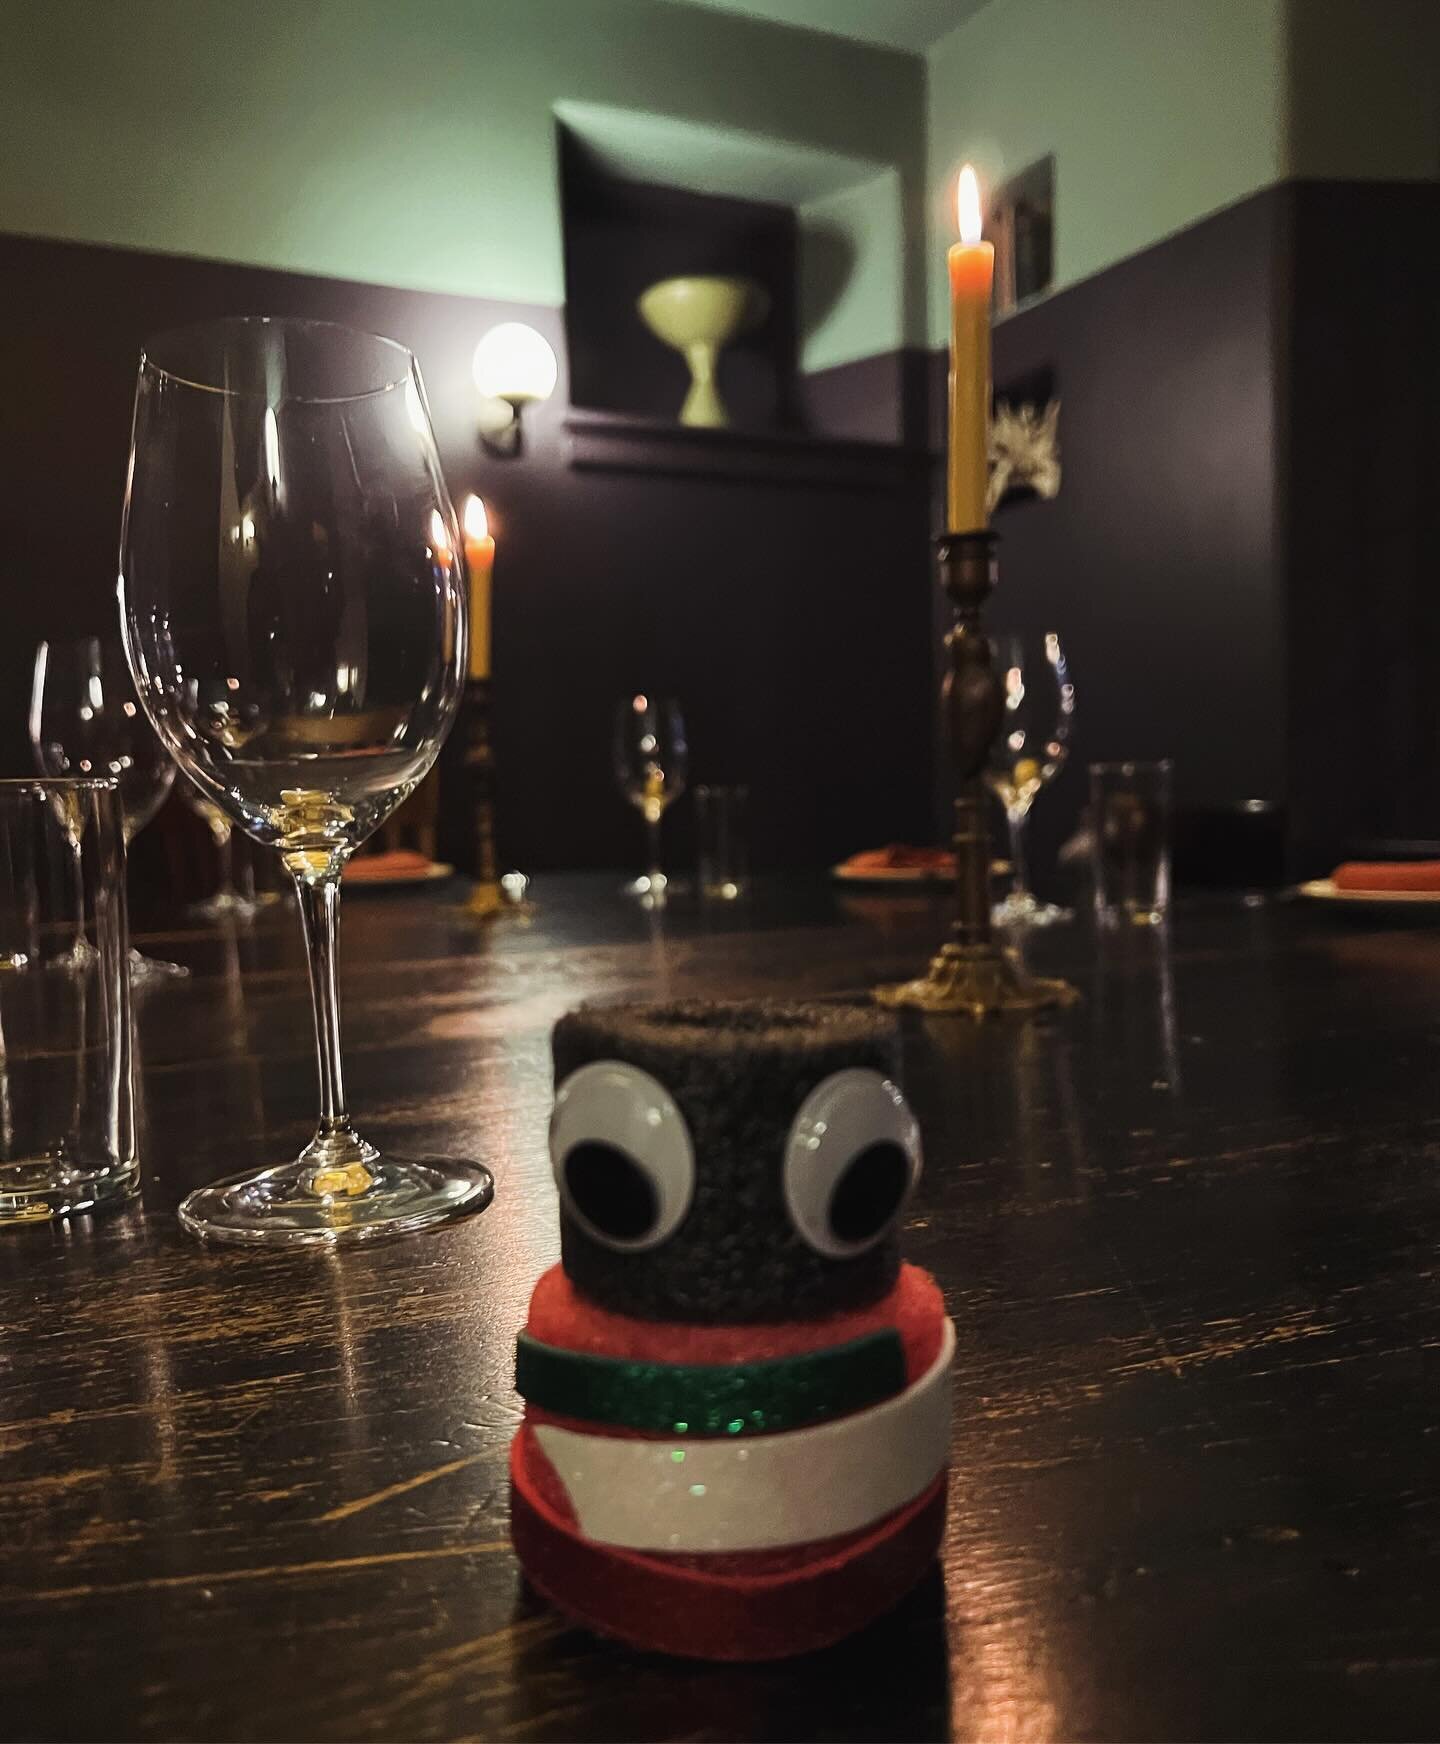 This puppet apparently likes fine dining.  I was packing up after our puppetry program @troutbeck.ny today and found this little creation that a workshop participant placed on a dining table.  It was alone in the room!  She eventually claimed it, but